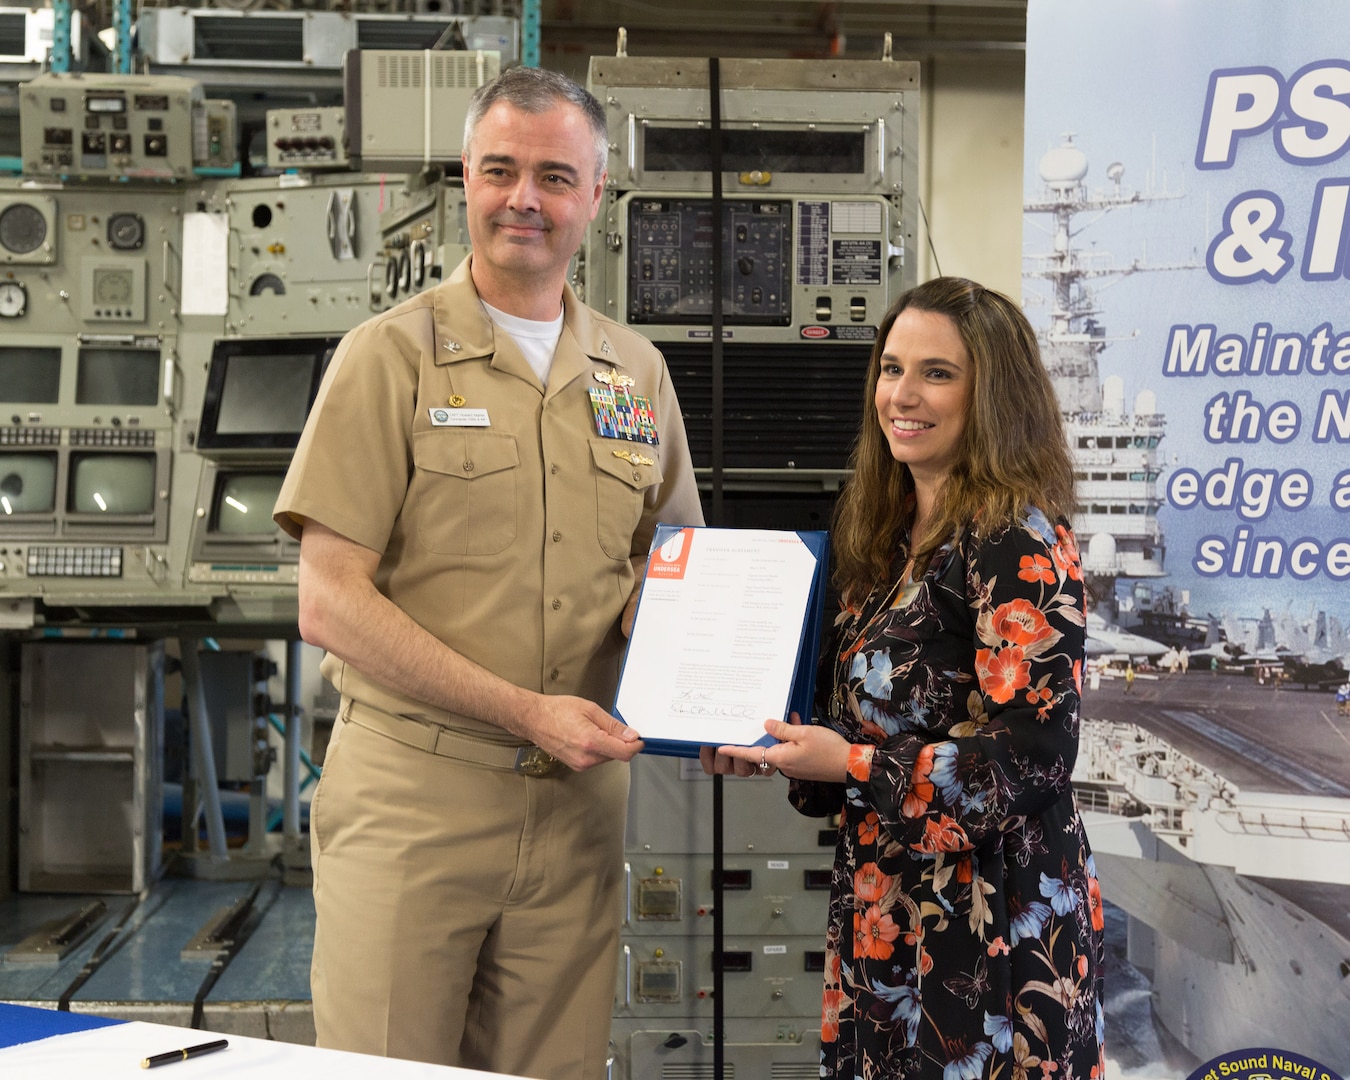 Captain Howard Markle, commander of Puget Sound Naval Shipyard & Intermediate Maintenance Facility, and U.S. Naval Undersea Museum Director Lindy Dosher officially transfer ownership of the control room from the experimental nuclear research submarine NR-1 from the shipyard to the museum during a ceremony in the museum’s private storage area May 8, 2018, in Keyport, Washington. (Photo by Carie Hagins, PSNS & IMF photographer)